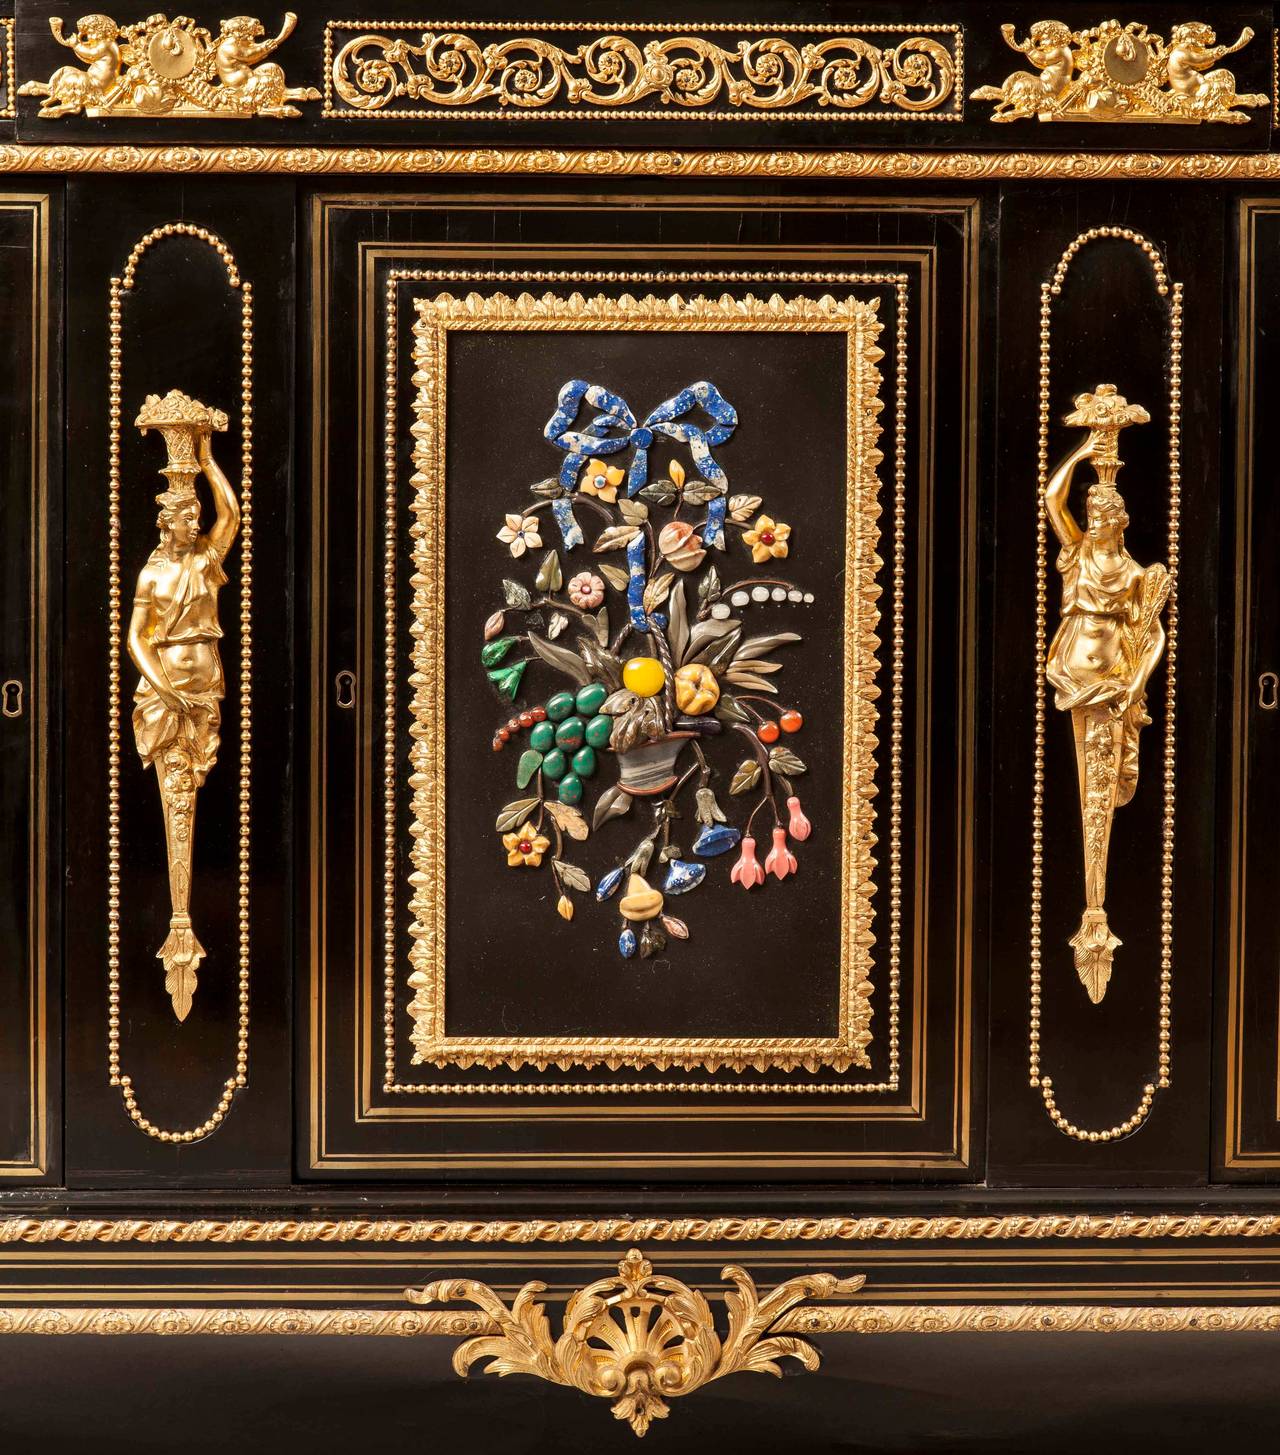 A side cabinet of the French Second Empire period in the manner of Befort Jeune

Constructed in bois norc¸i, inlaid with brass fillets, extensively dressed with gilt bronze mounts, and pietra dura panels.

Of rectangular form, rising from turned